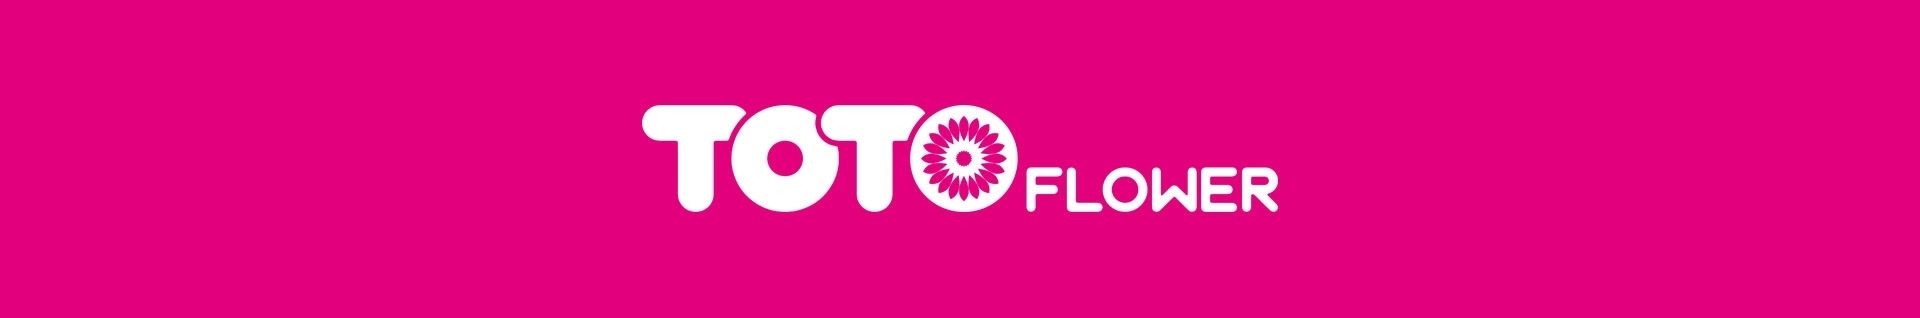 Toto Flower